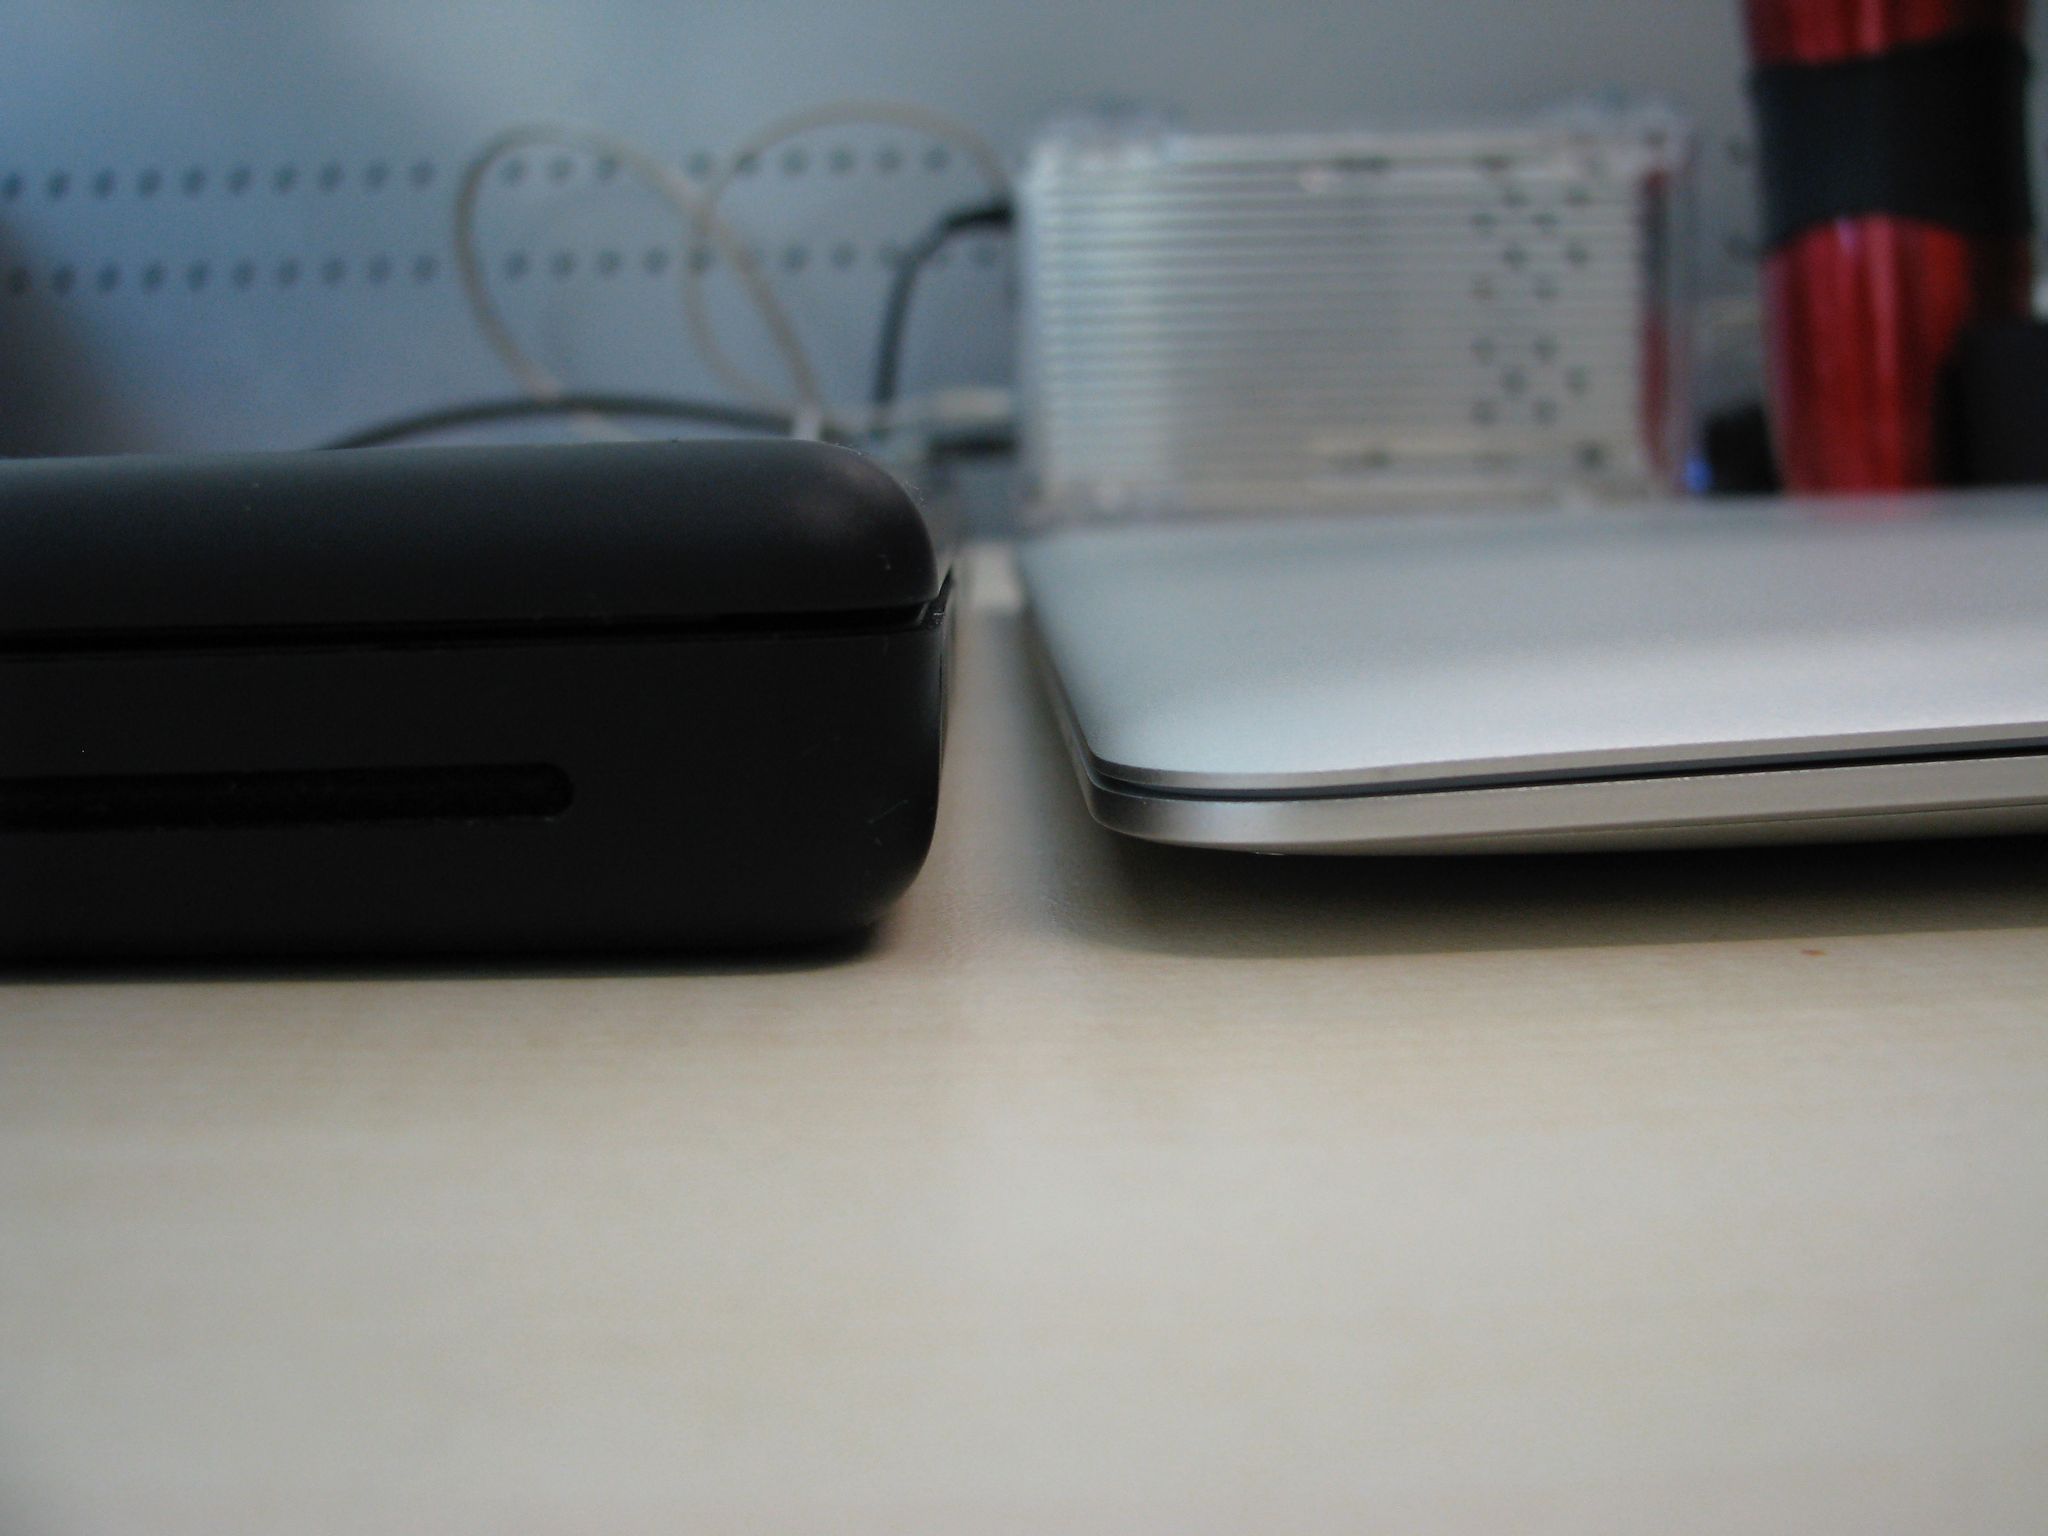 A photo taken from the side of the thin end of a first-generation MacBook Air sitting next to a black polycarbonate MacBook.